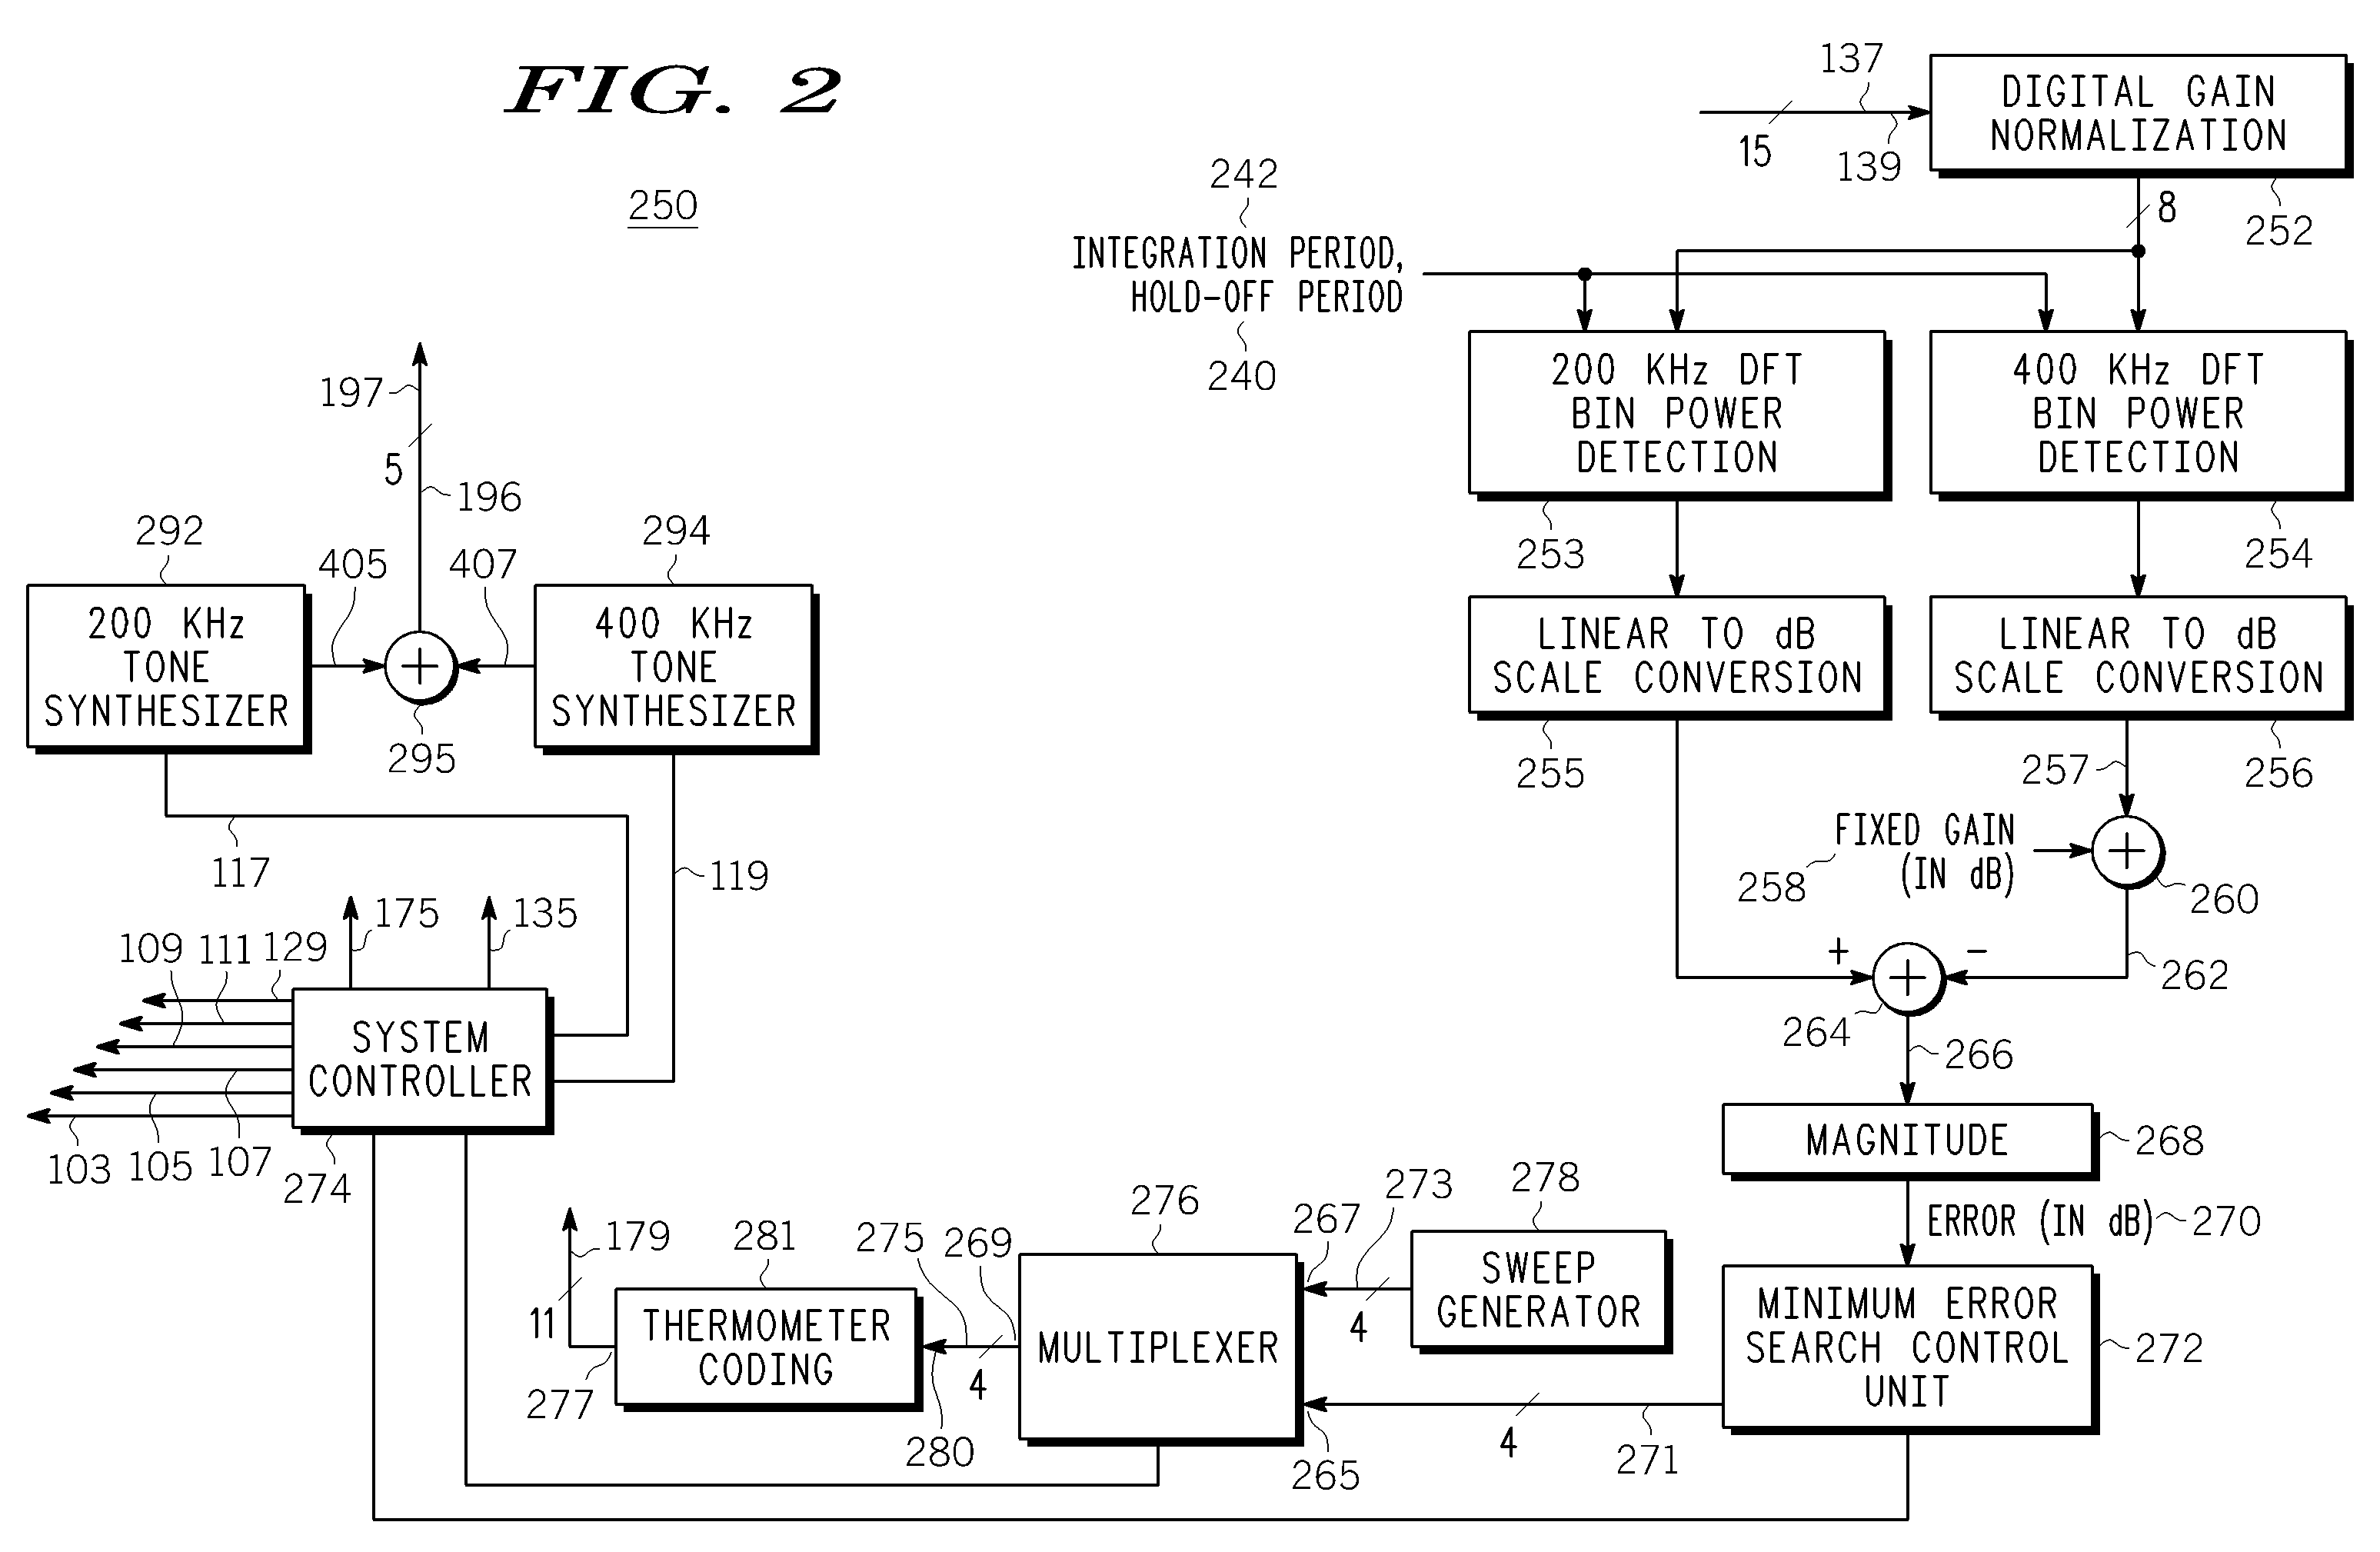 Controlling the bandwidth of an analog filter